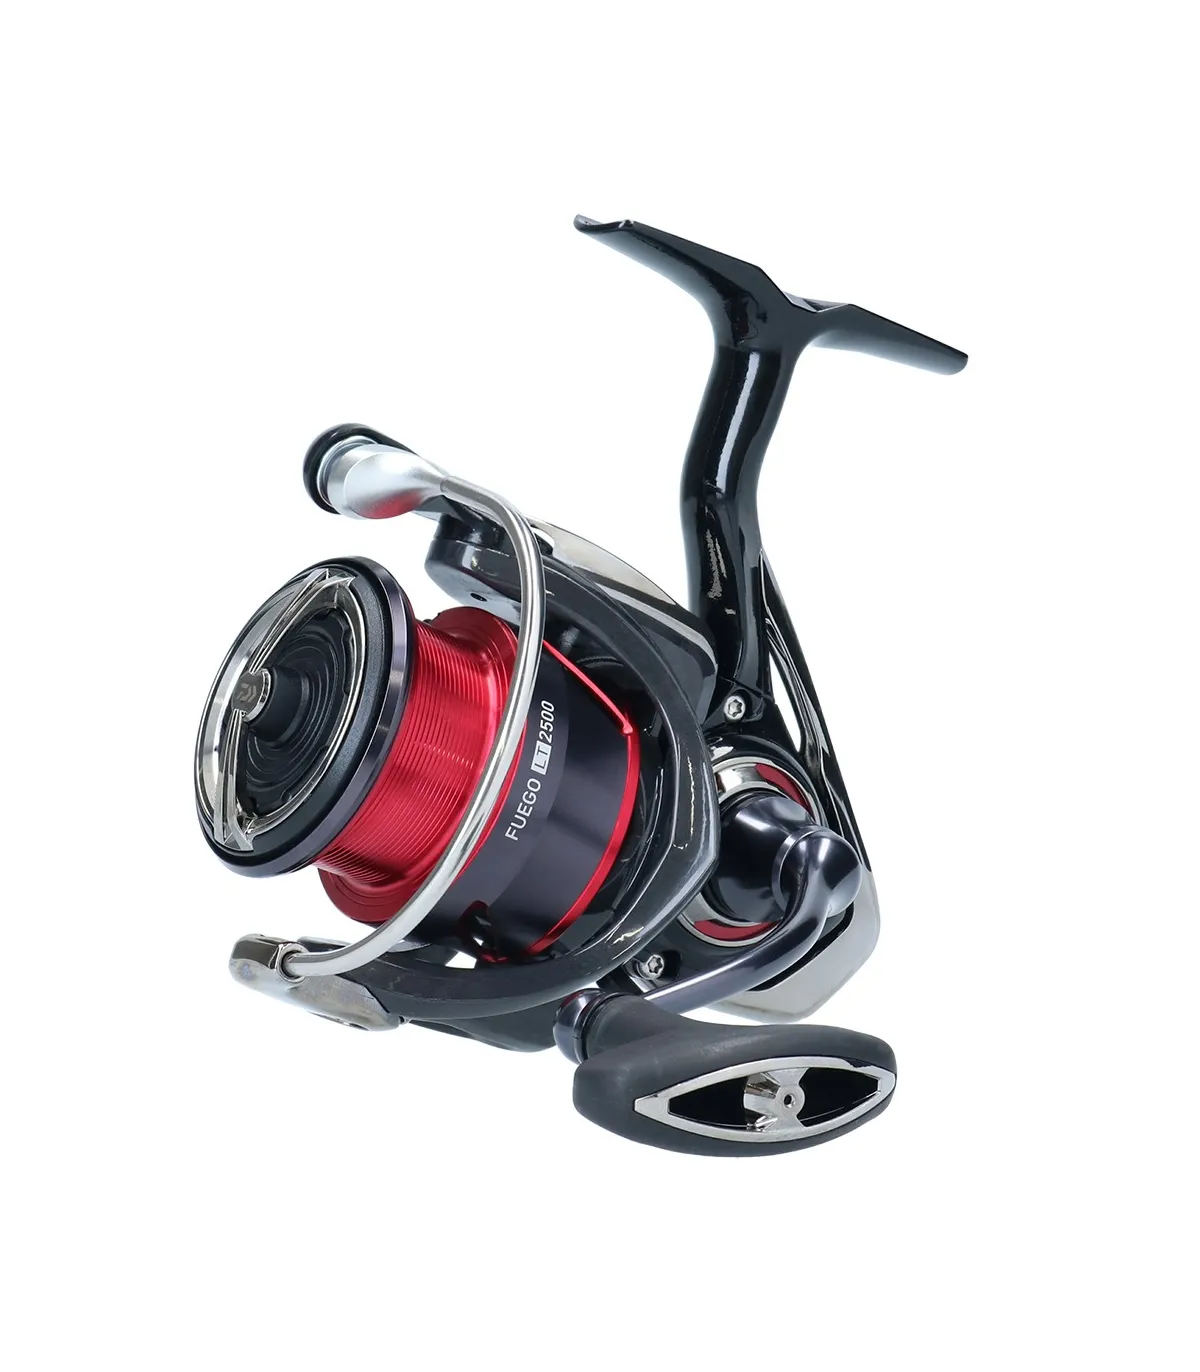 Daiwa Fuego LT Spinning Reel 2500D-XH 2500 Series Excellent Condition #4 -  Pioneer Recycling Services